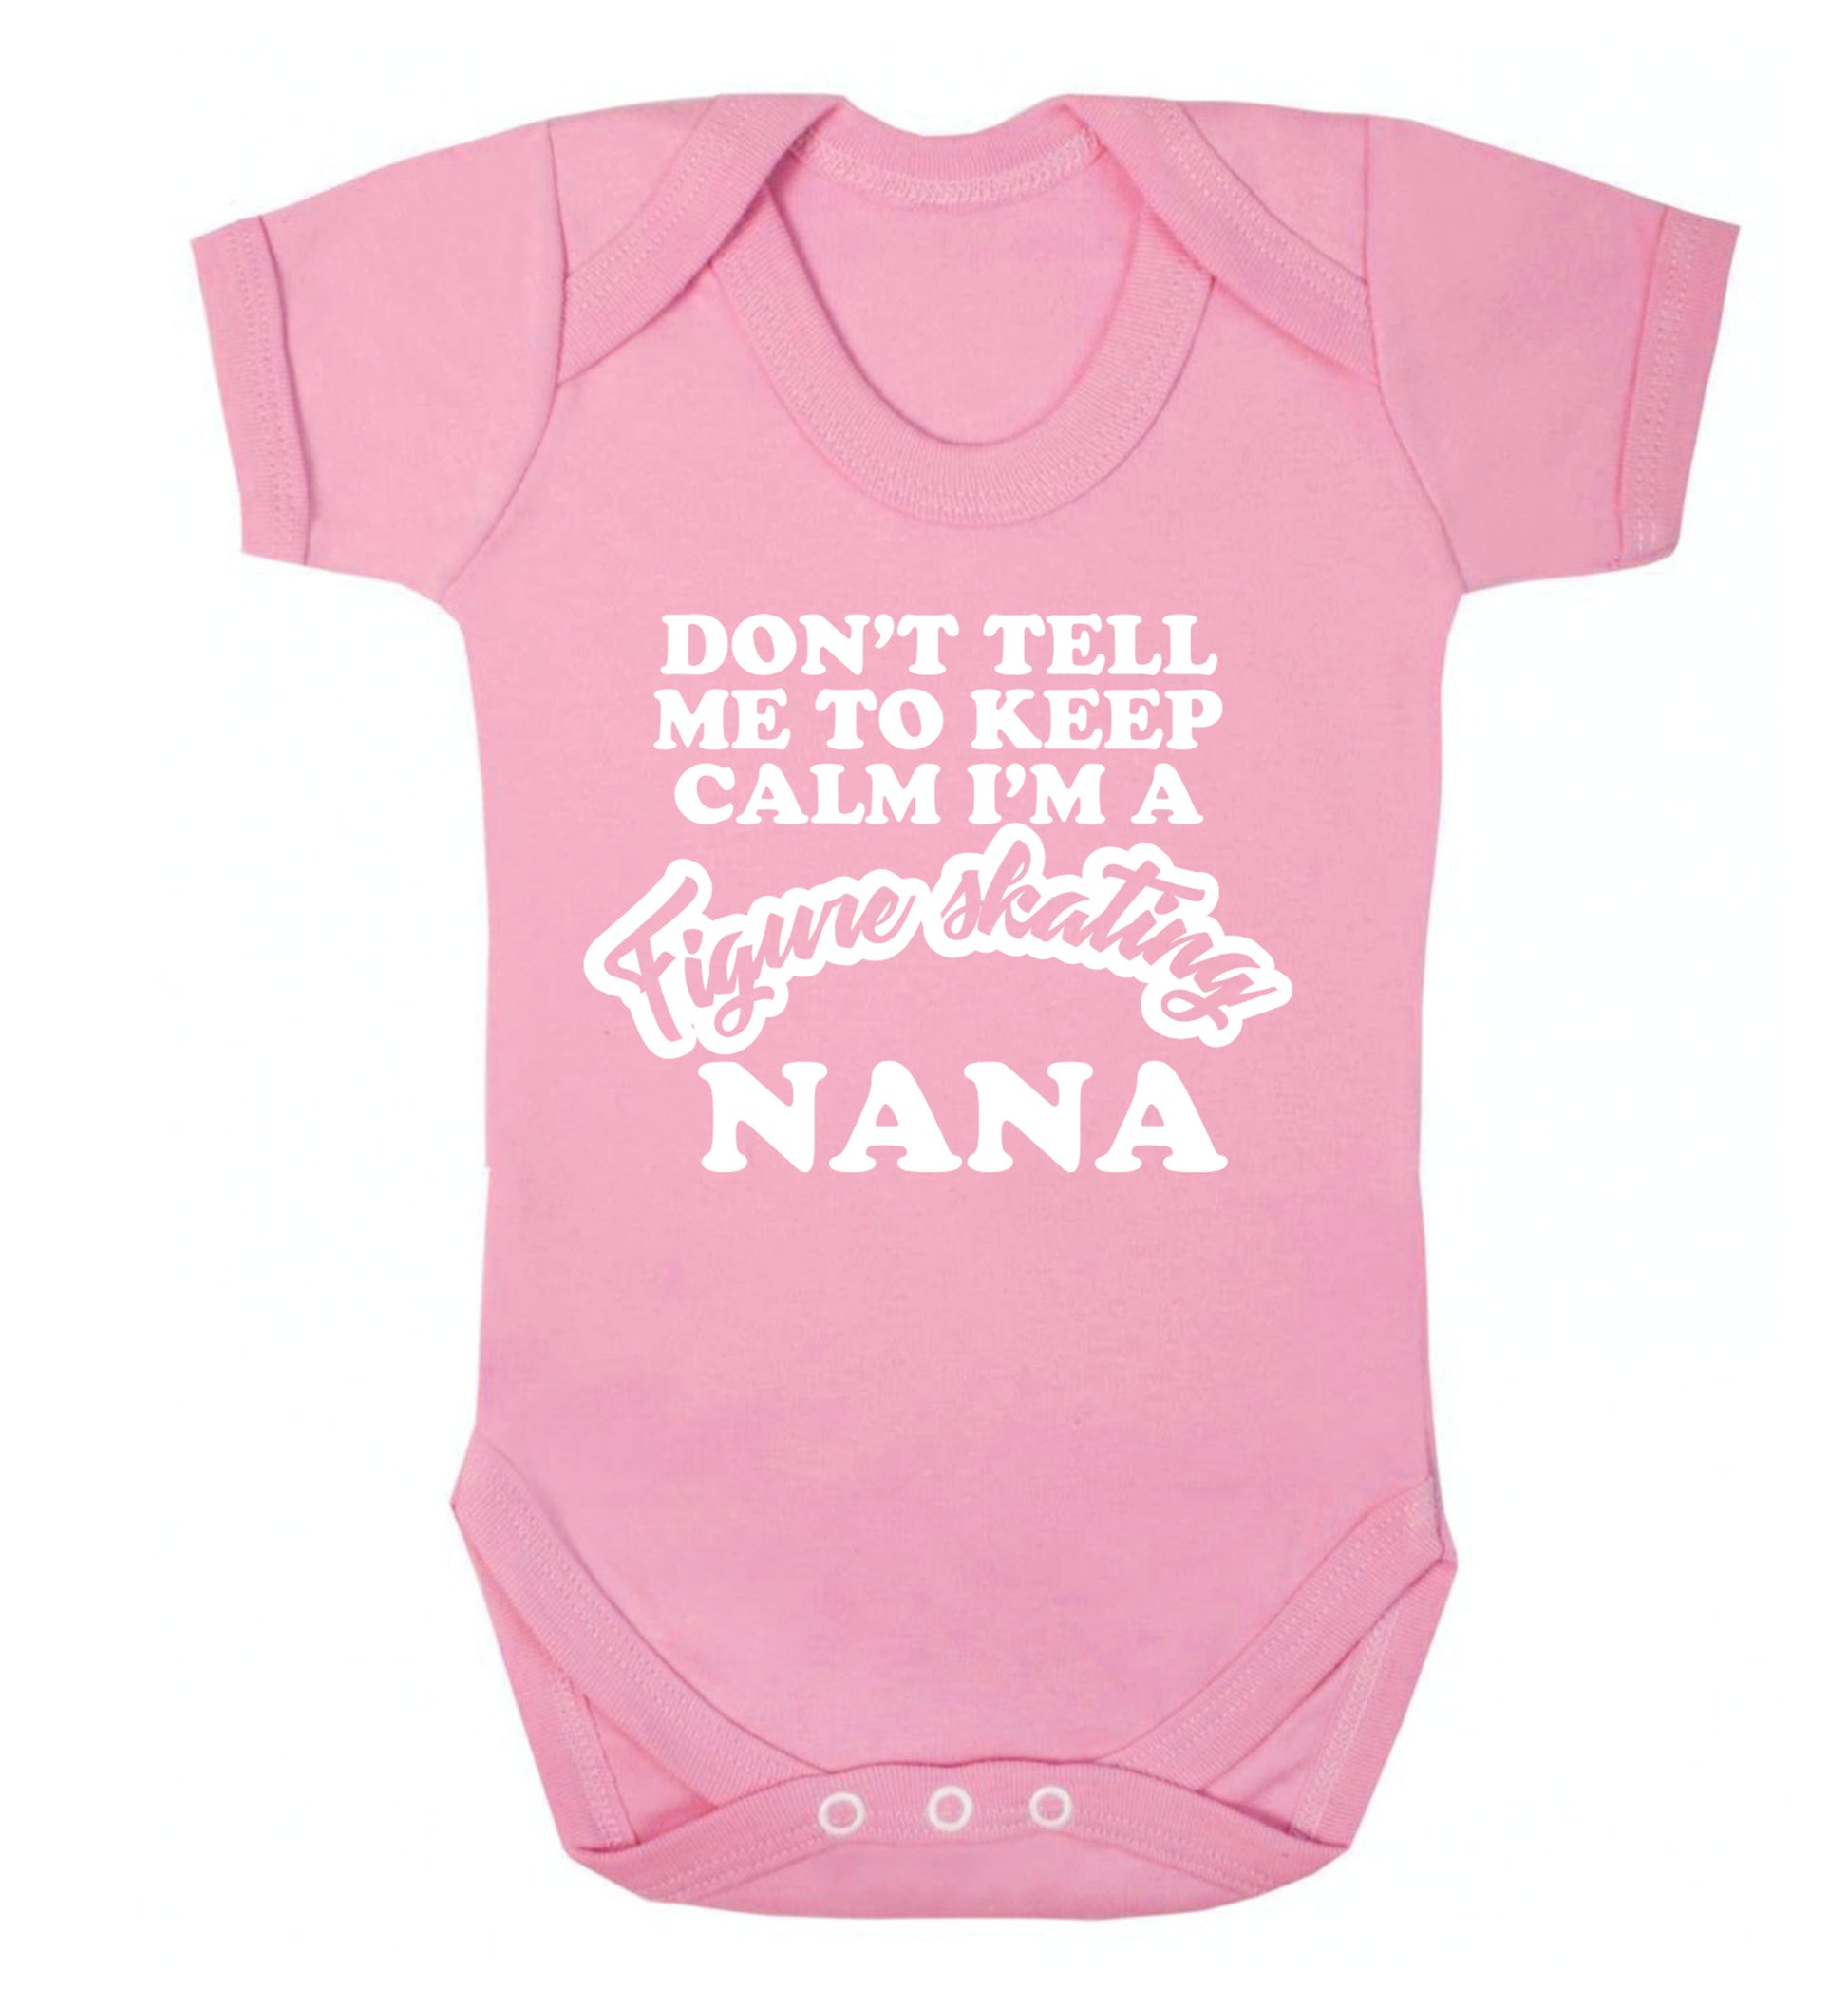 Don't tell me to keep calm I'm a figure skating nana Baby Vest pale pink 18-24 months